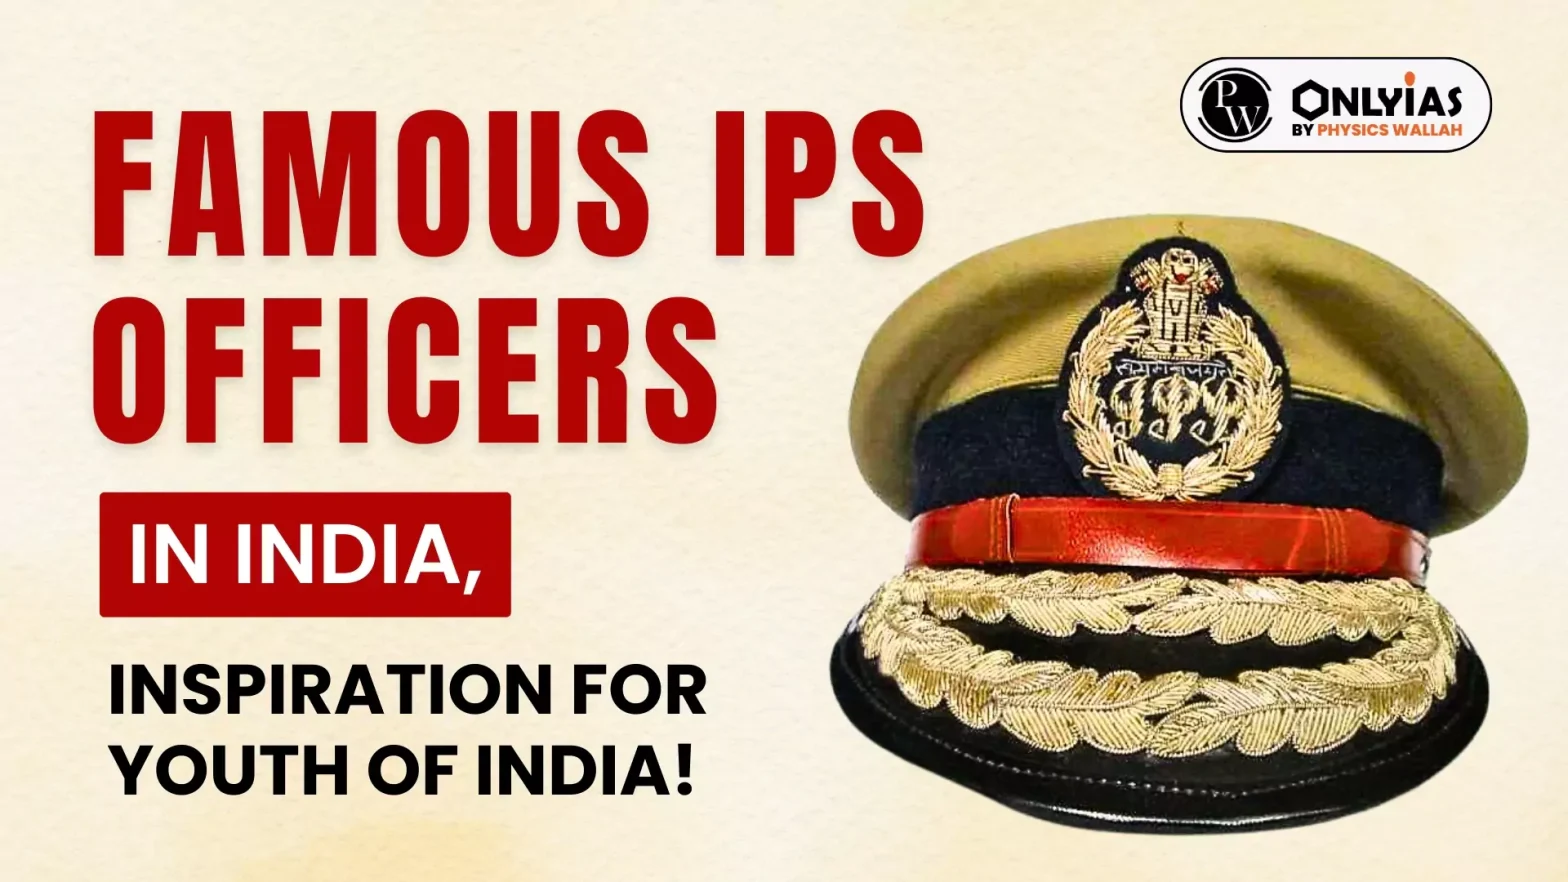 Famous IPS Officers in India, Inspiration for Youth of India!